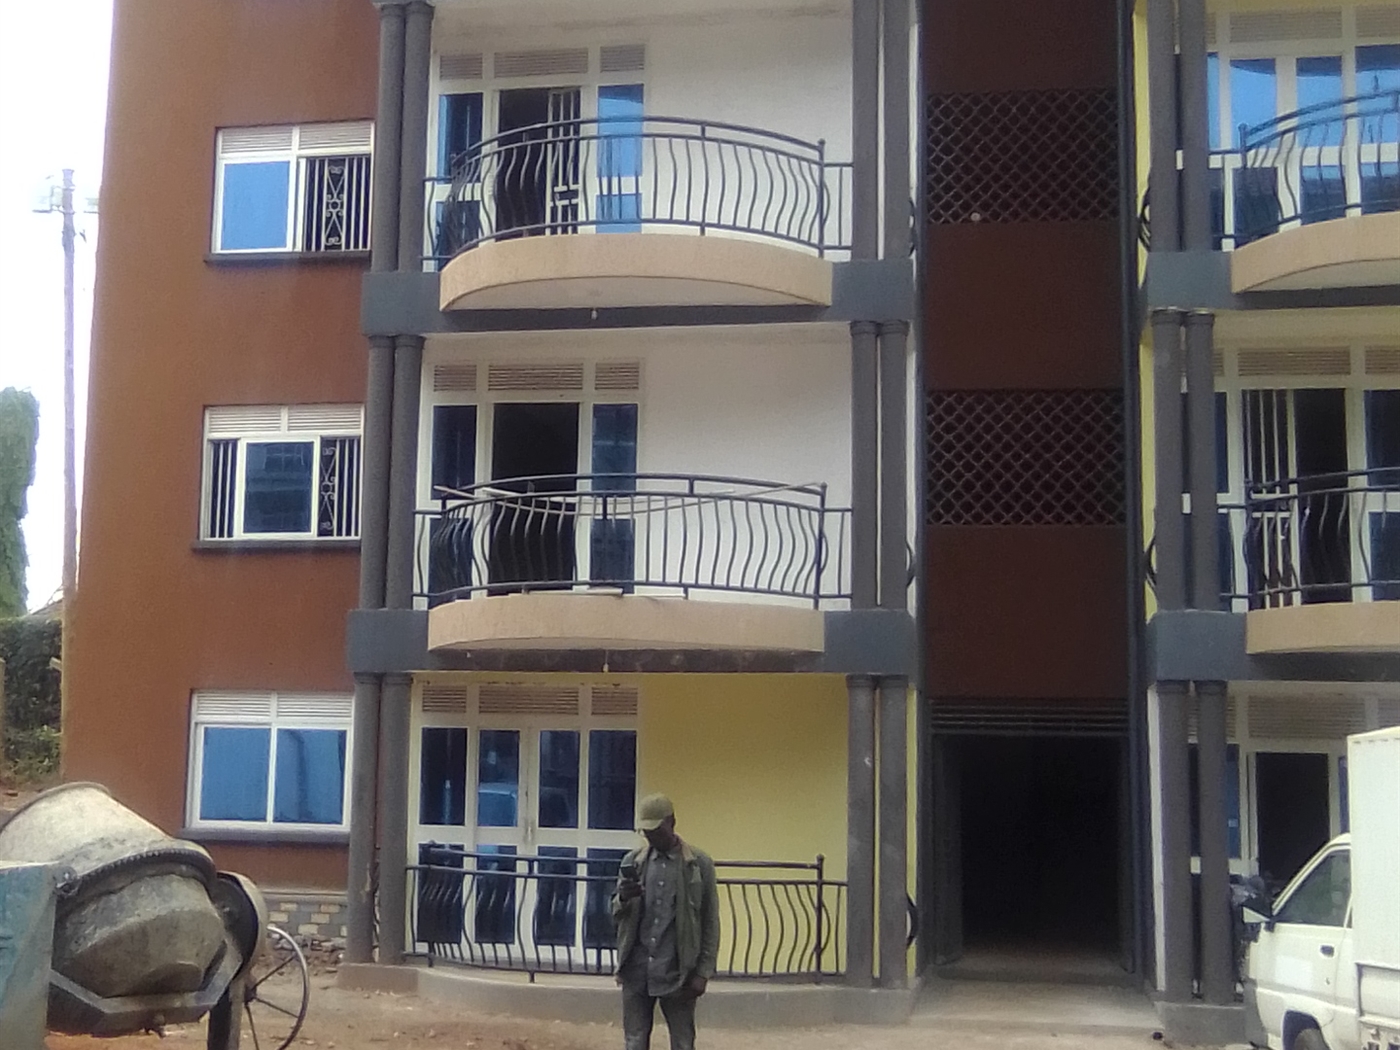 Apartment for rent in Seniorquoters Mbaale